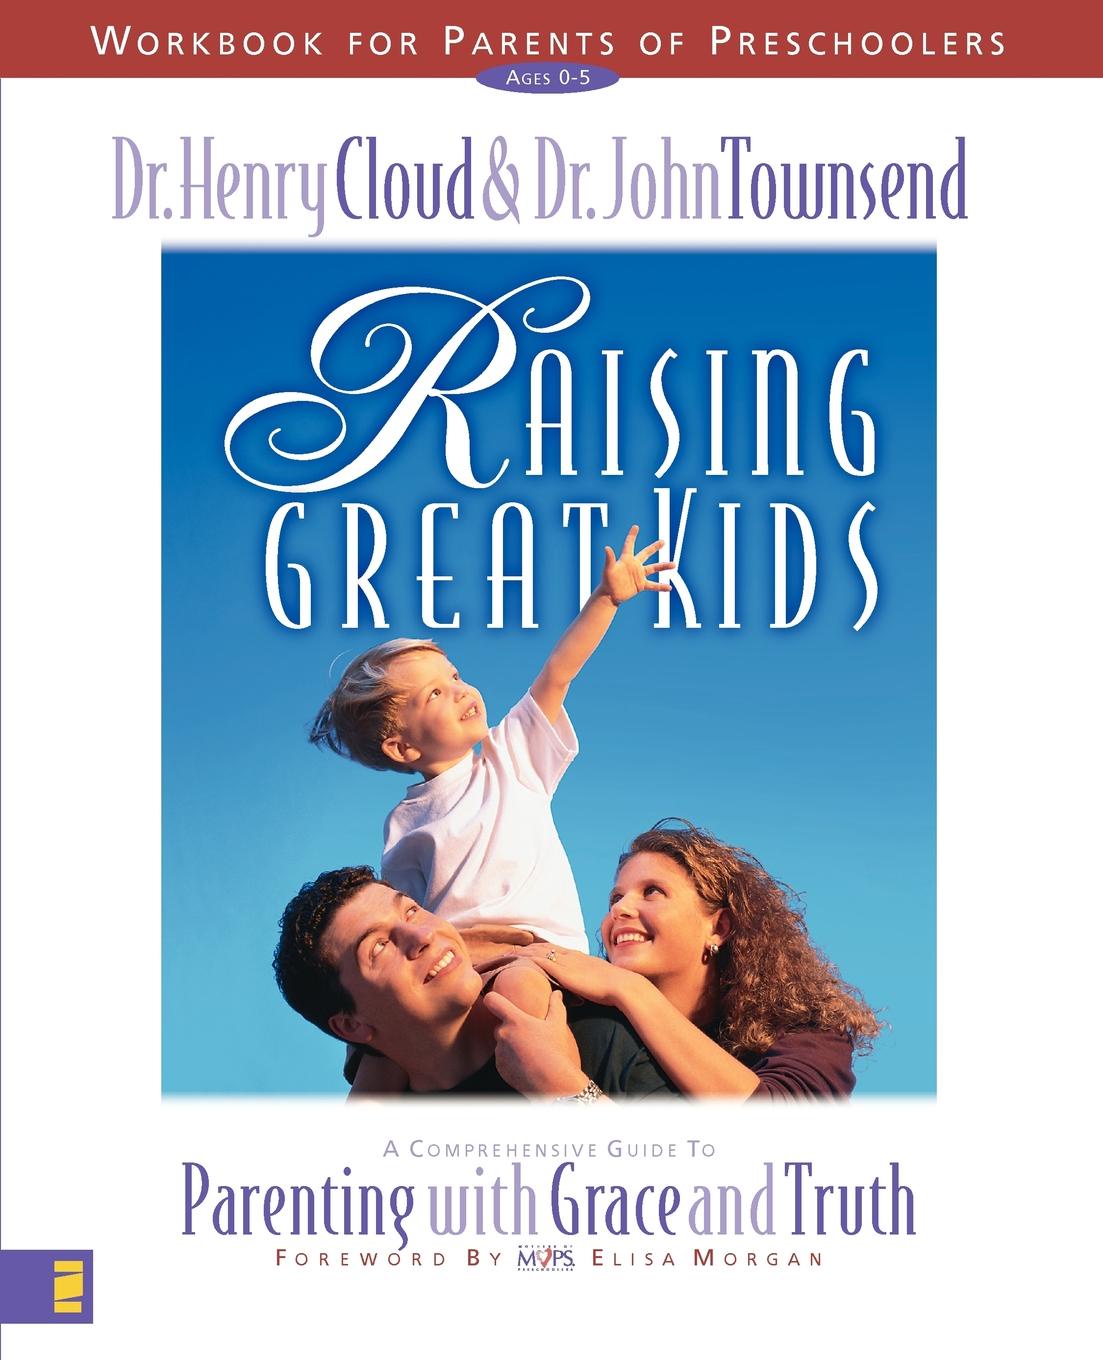 Raising Great Kids Workbook for Parents of Preschoolers. A Comprehensive Guide to Parenting with Grace and Truth